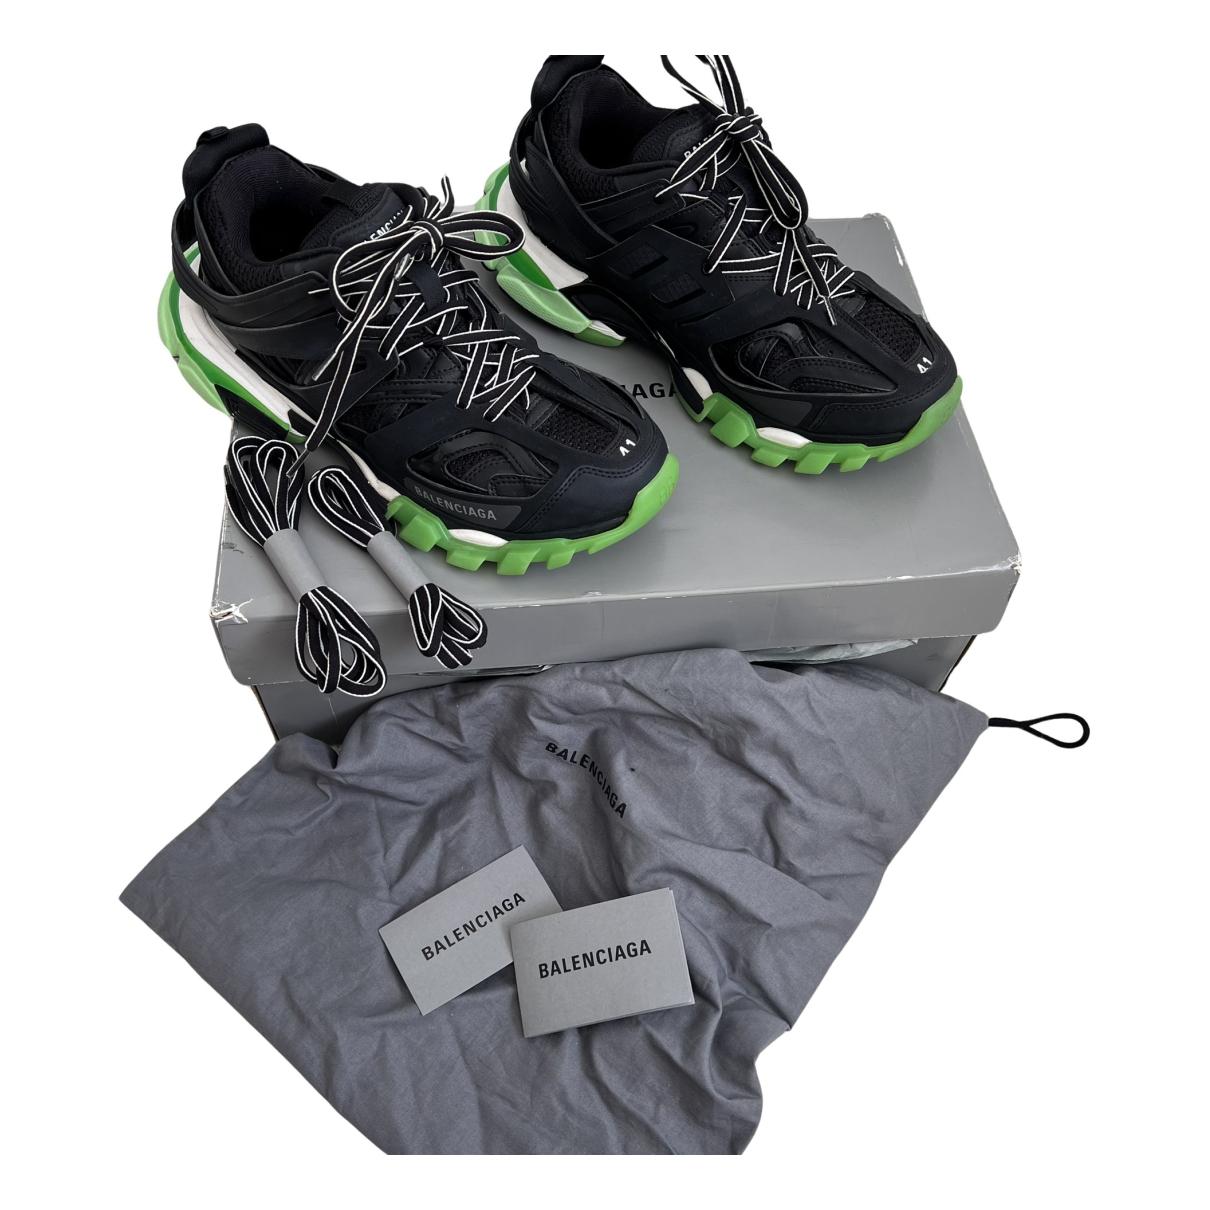 Track low trainers Balenciaga Black size 41 EU in Other - 36874506